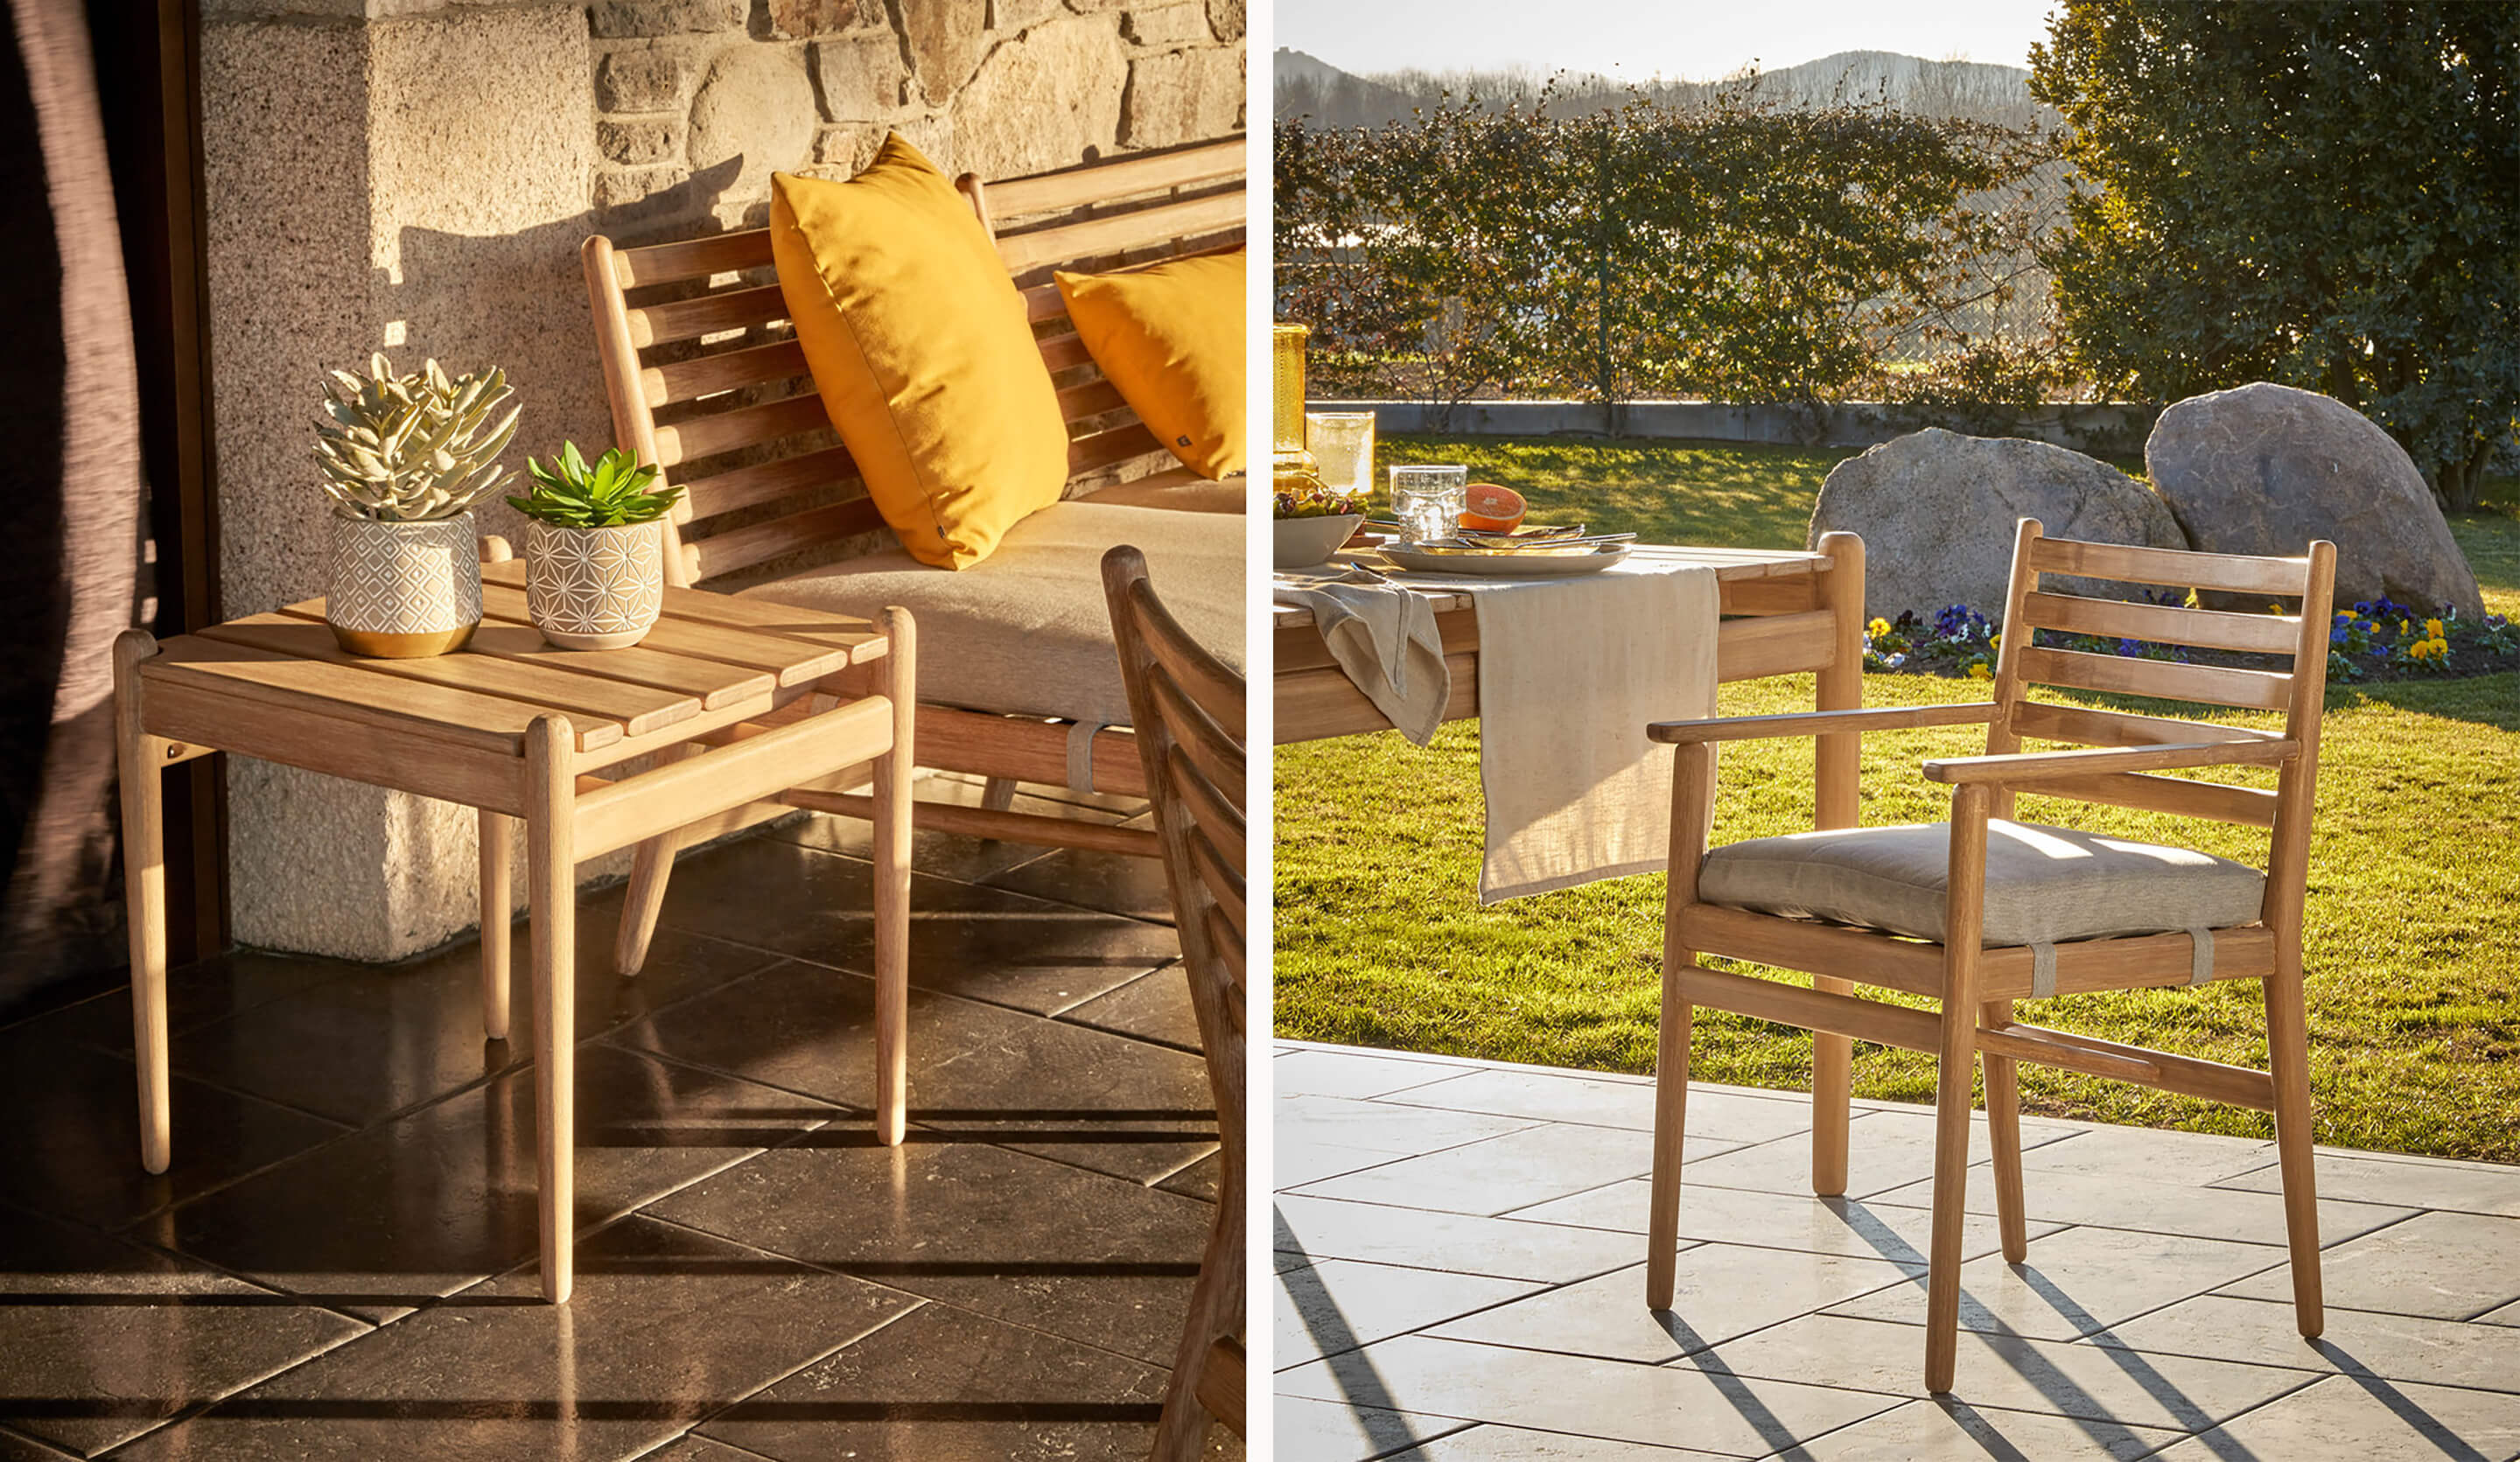 Enjoy your alfresco spaces and soak in the sun in style with our inviting selection of outdoor furniture, including outdoor seating, tables, dining chairs, and lounge chair.